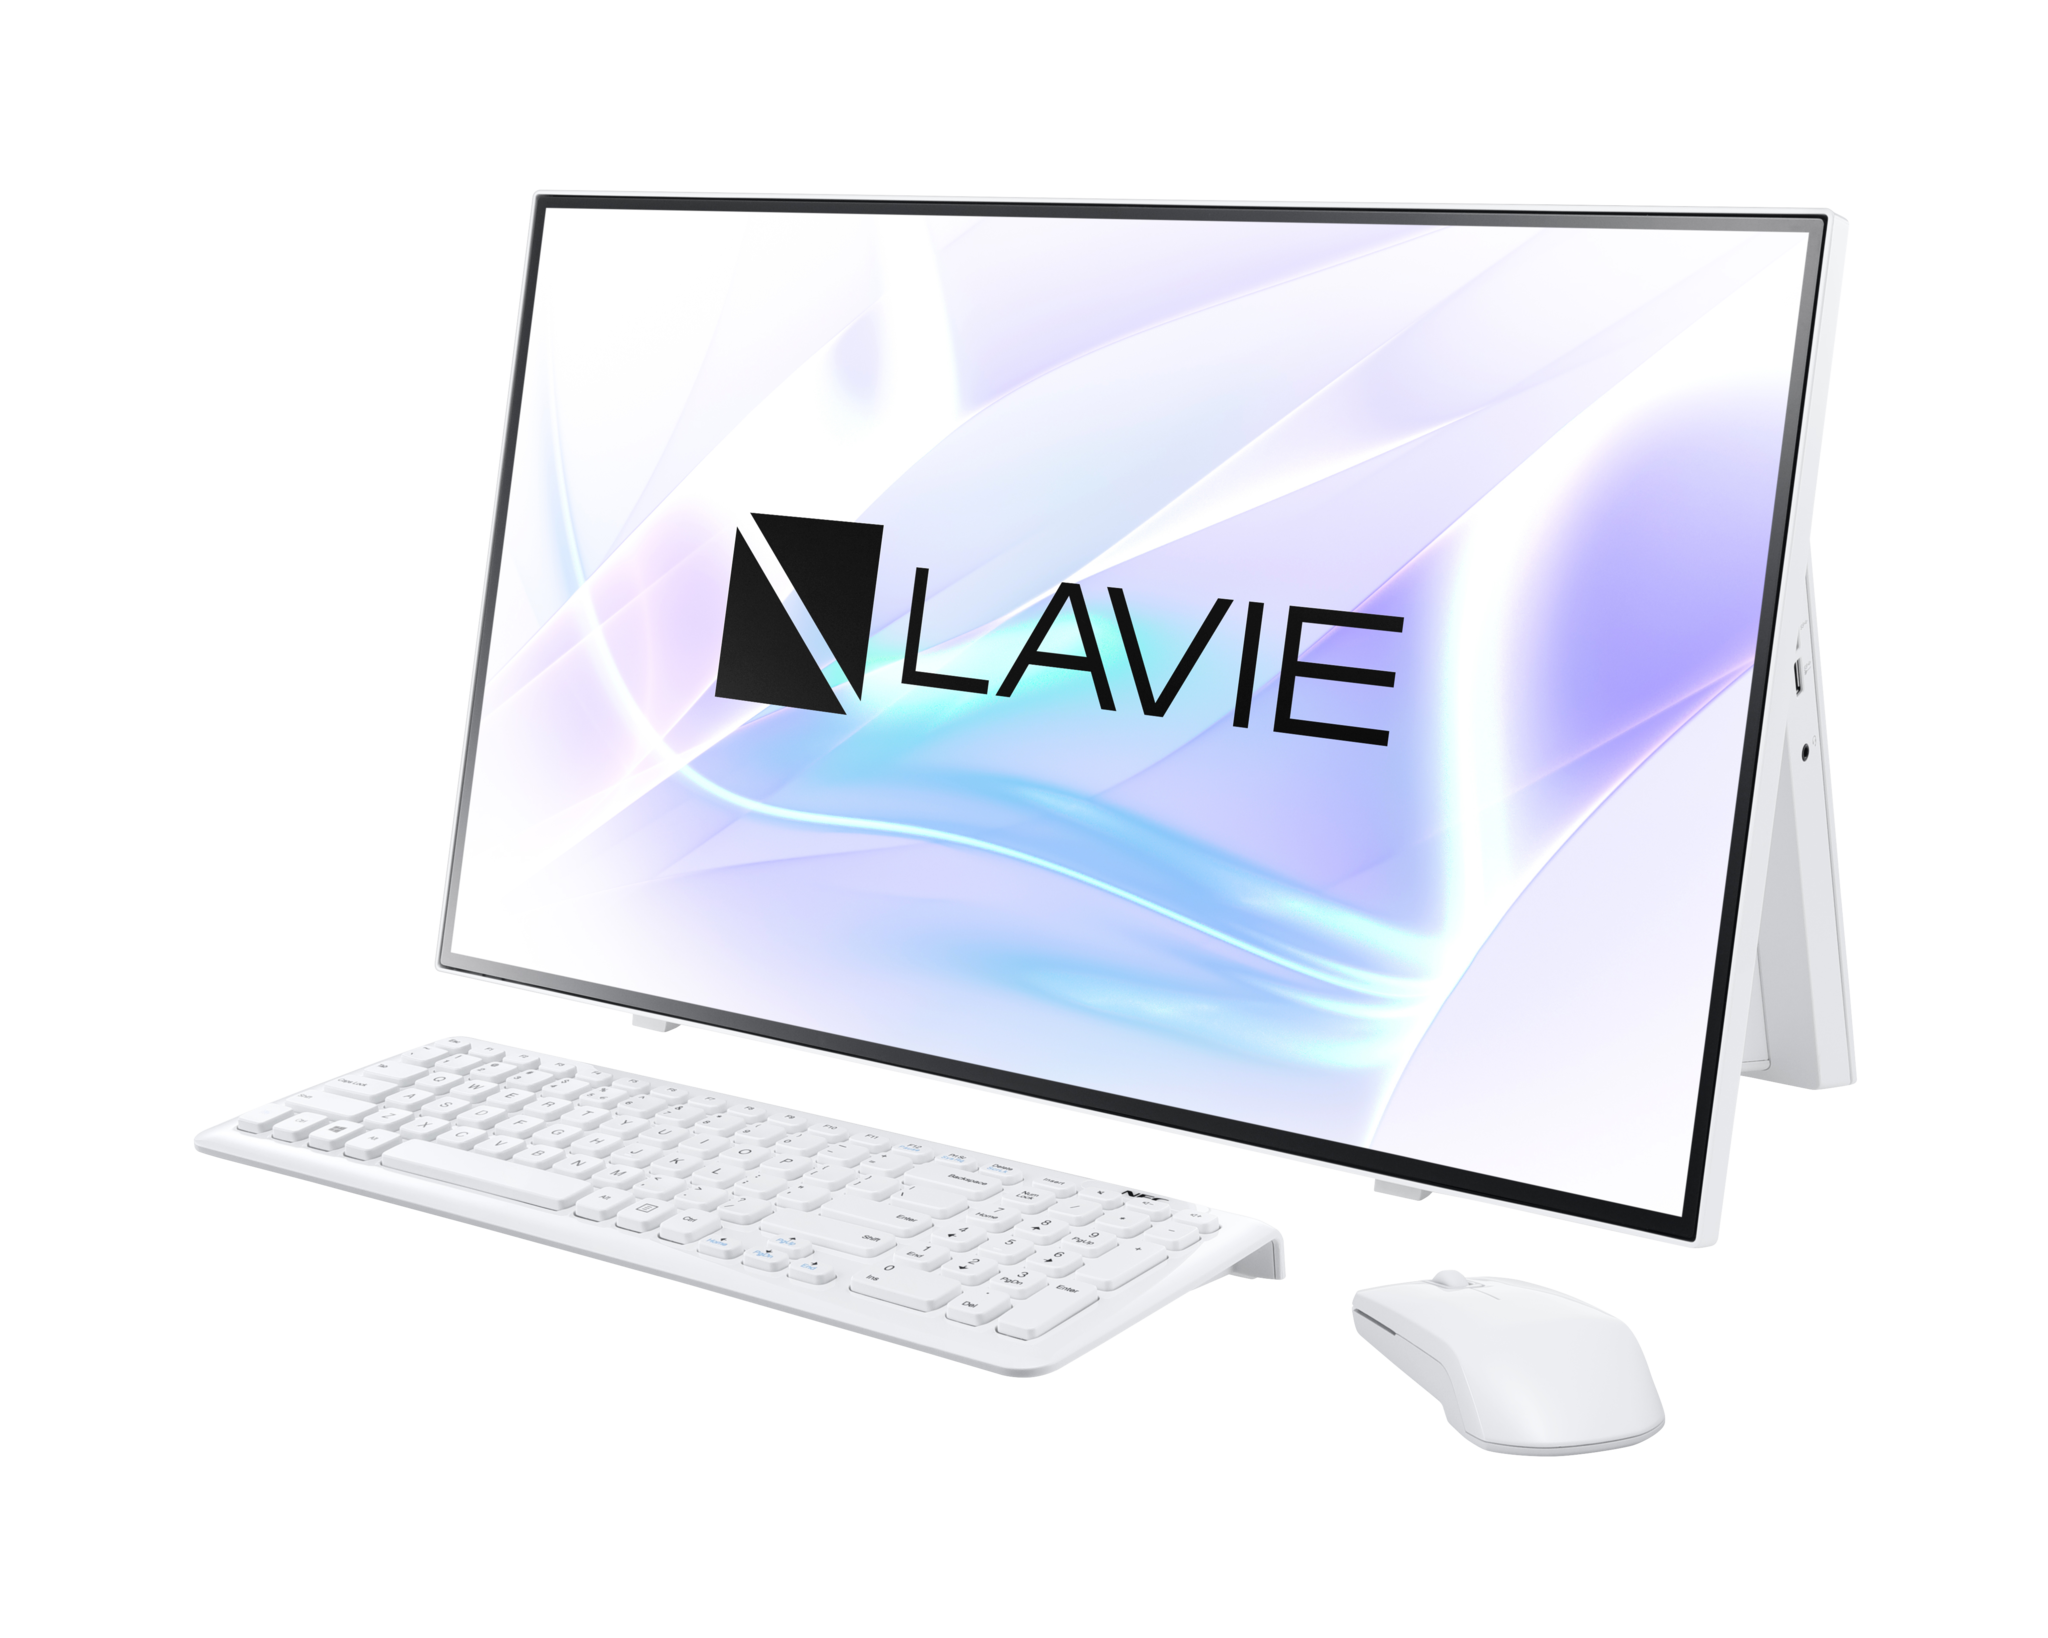 NEC announces new LAVIE PCs, including an all-in-one and two 